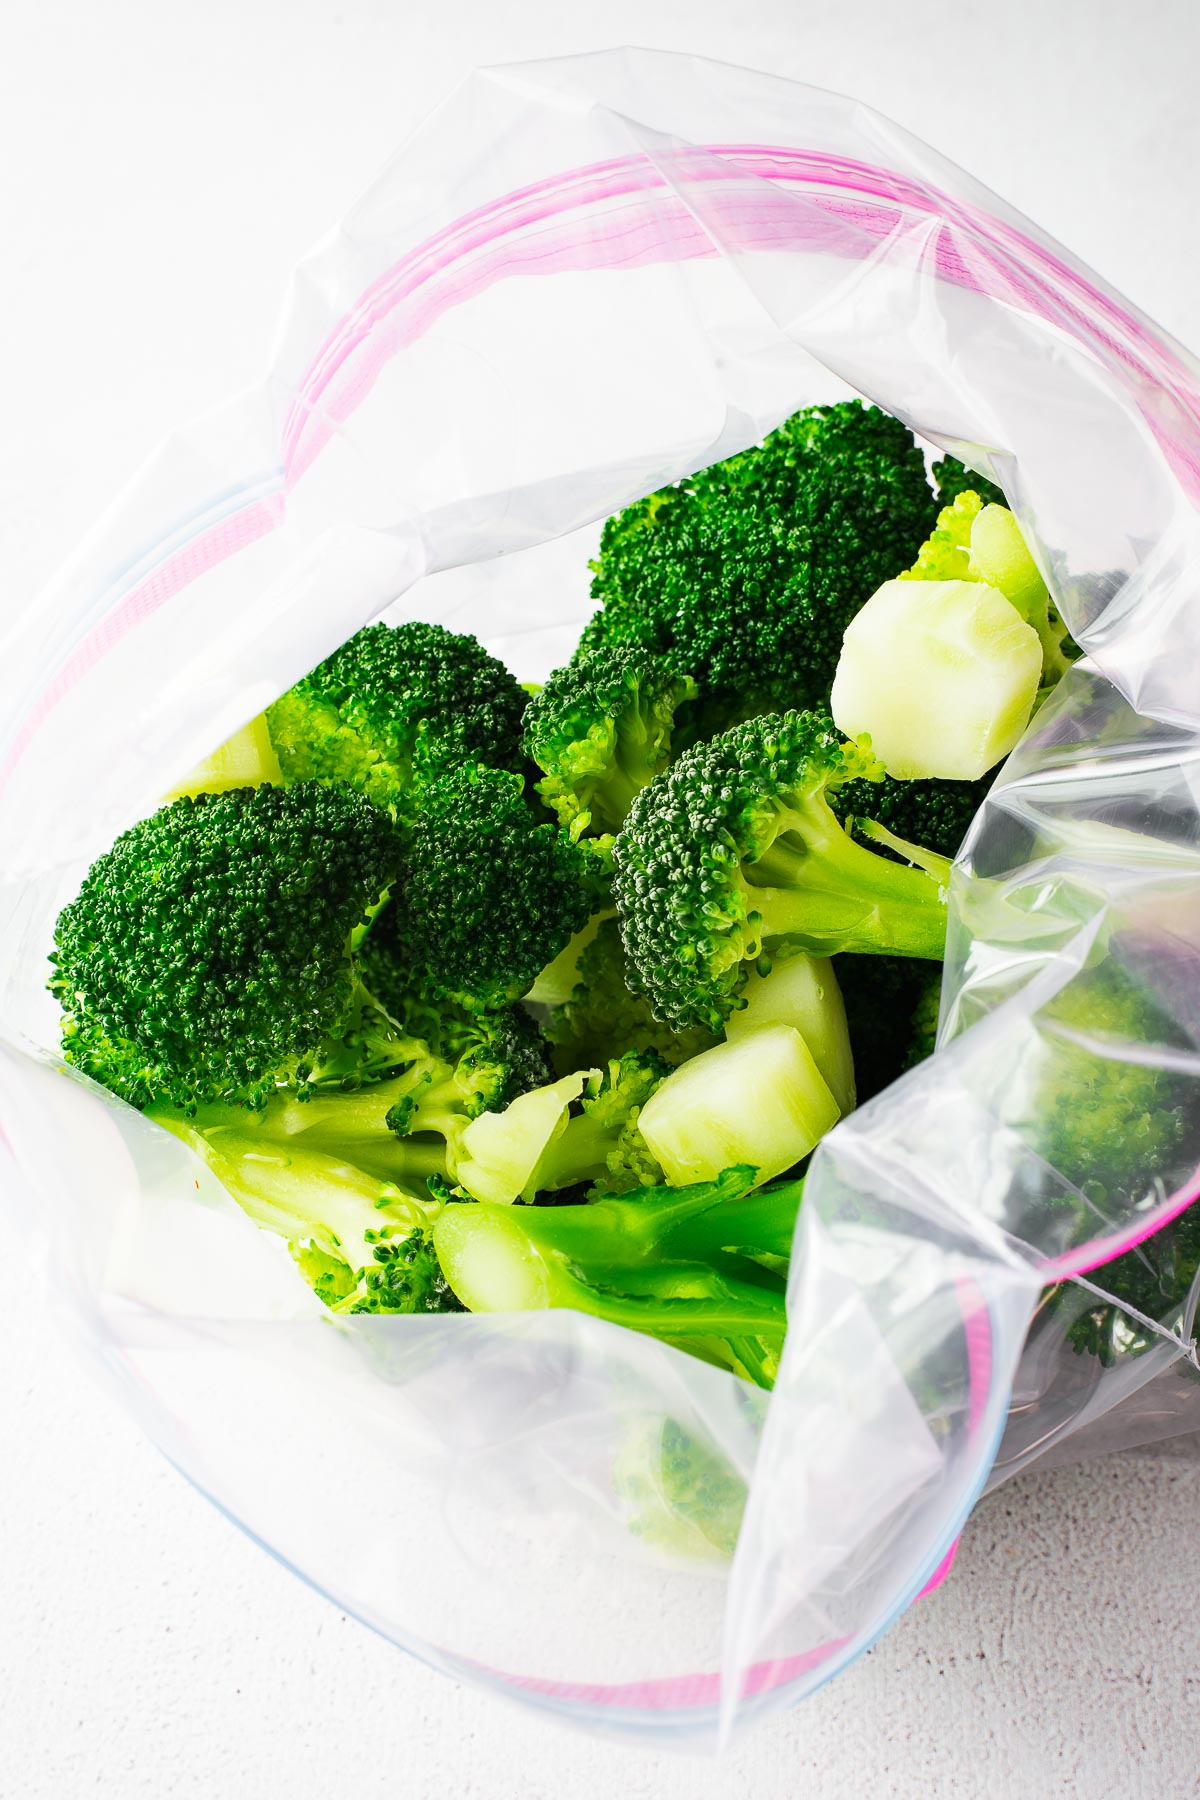 How to Freeze Broccoli (The Best Way)